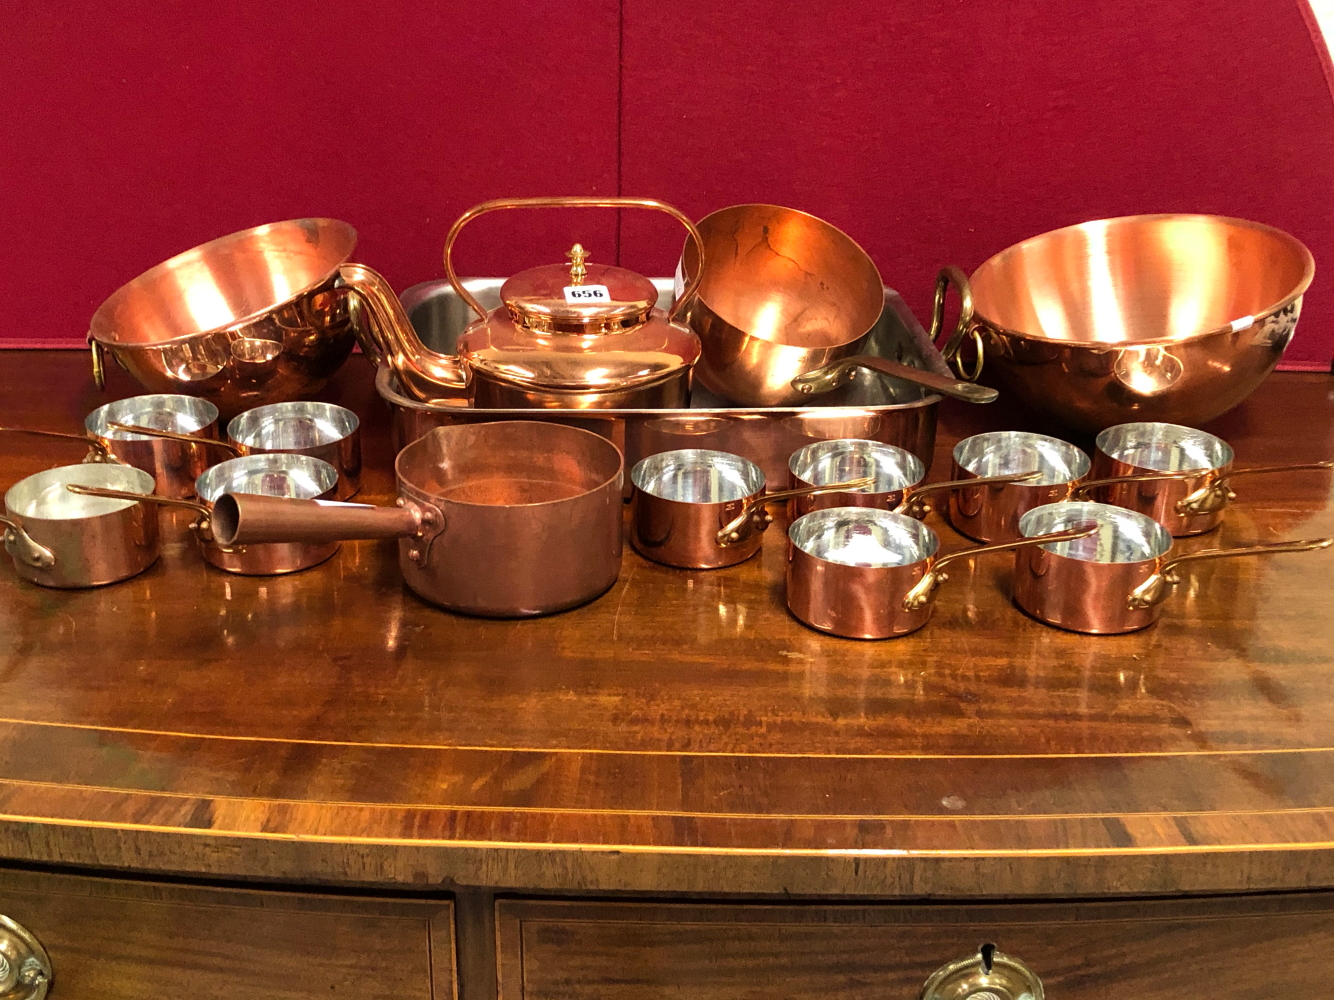 A COLLECTION OF 10 COPPER SAUCEPANS. Dia. 9.5cms. TWO LARGER COPPER SAUCEPANS, A TWO HANDLED